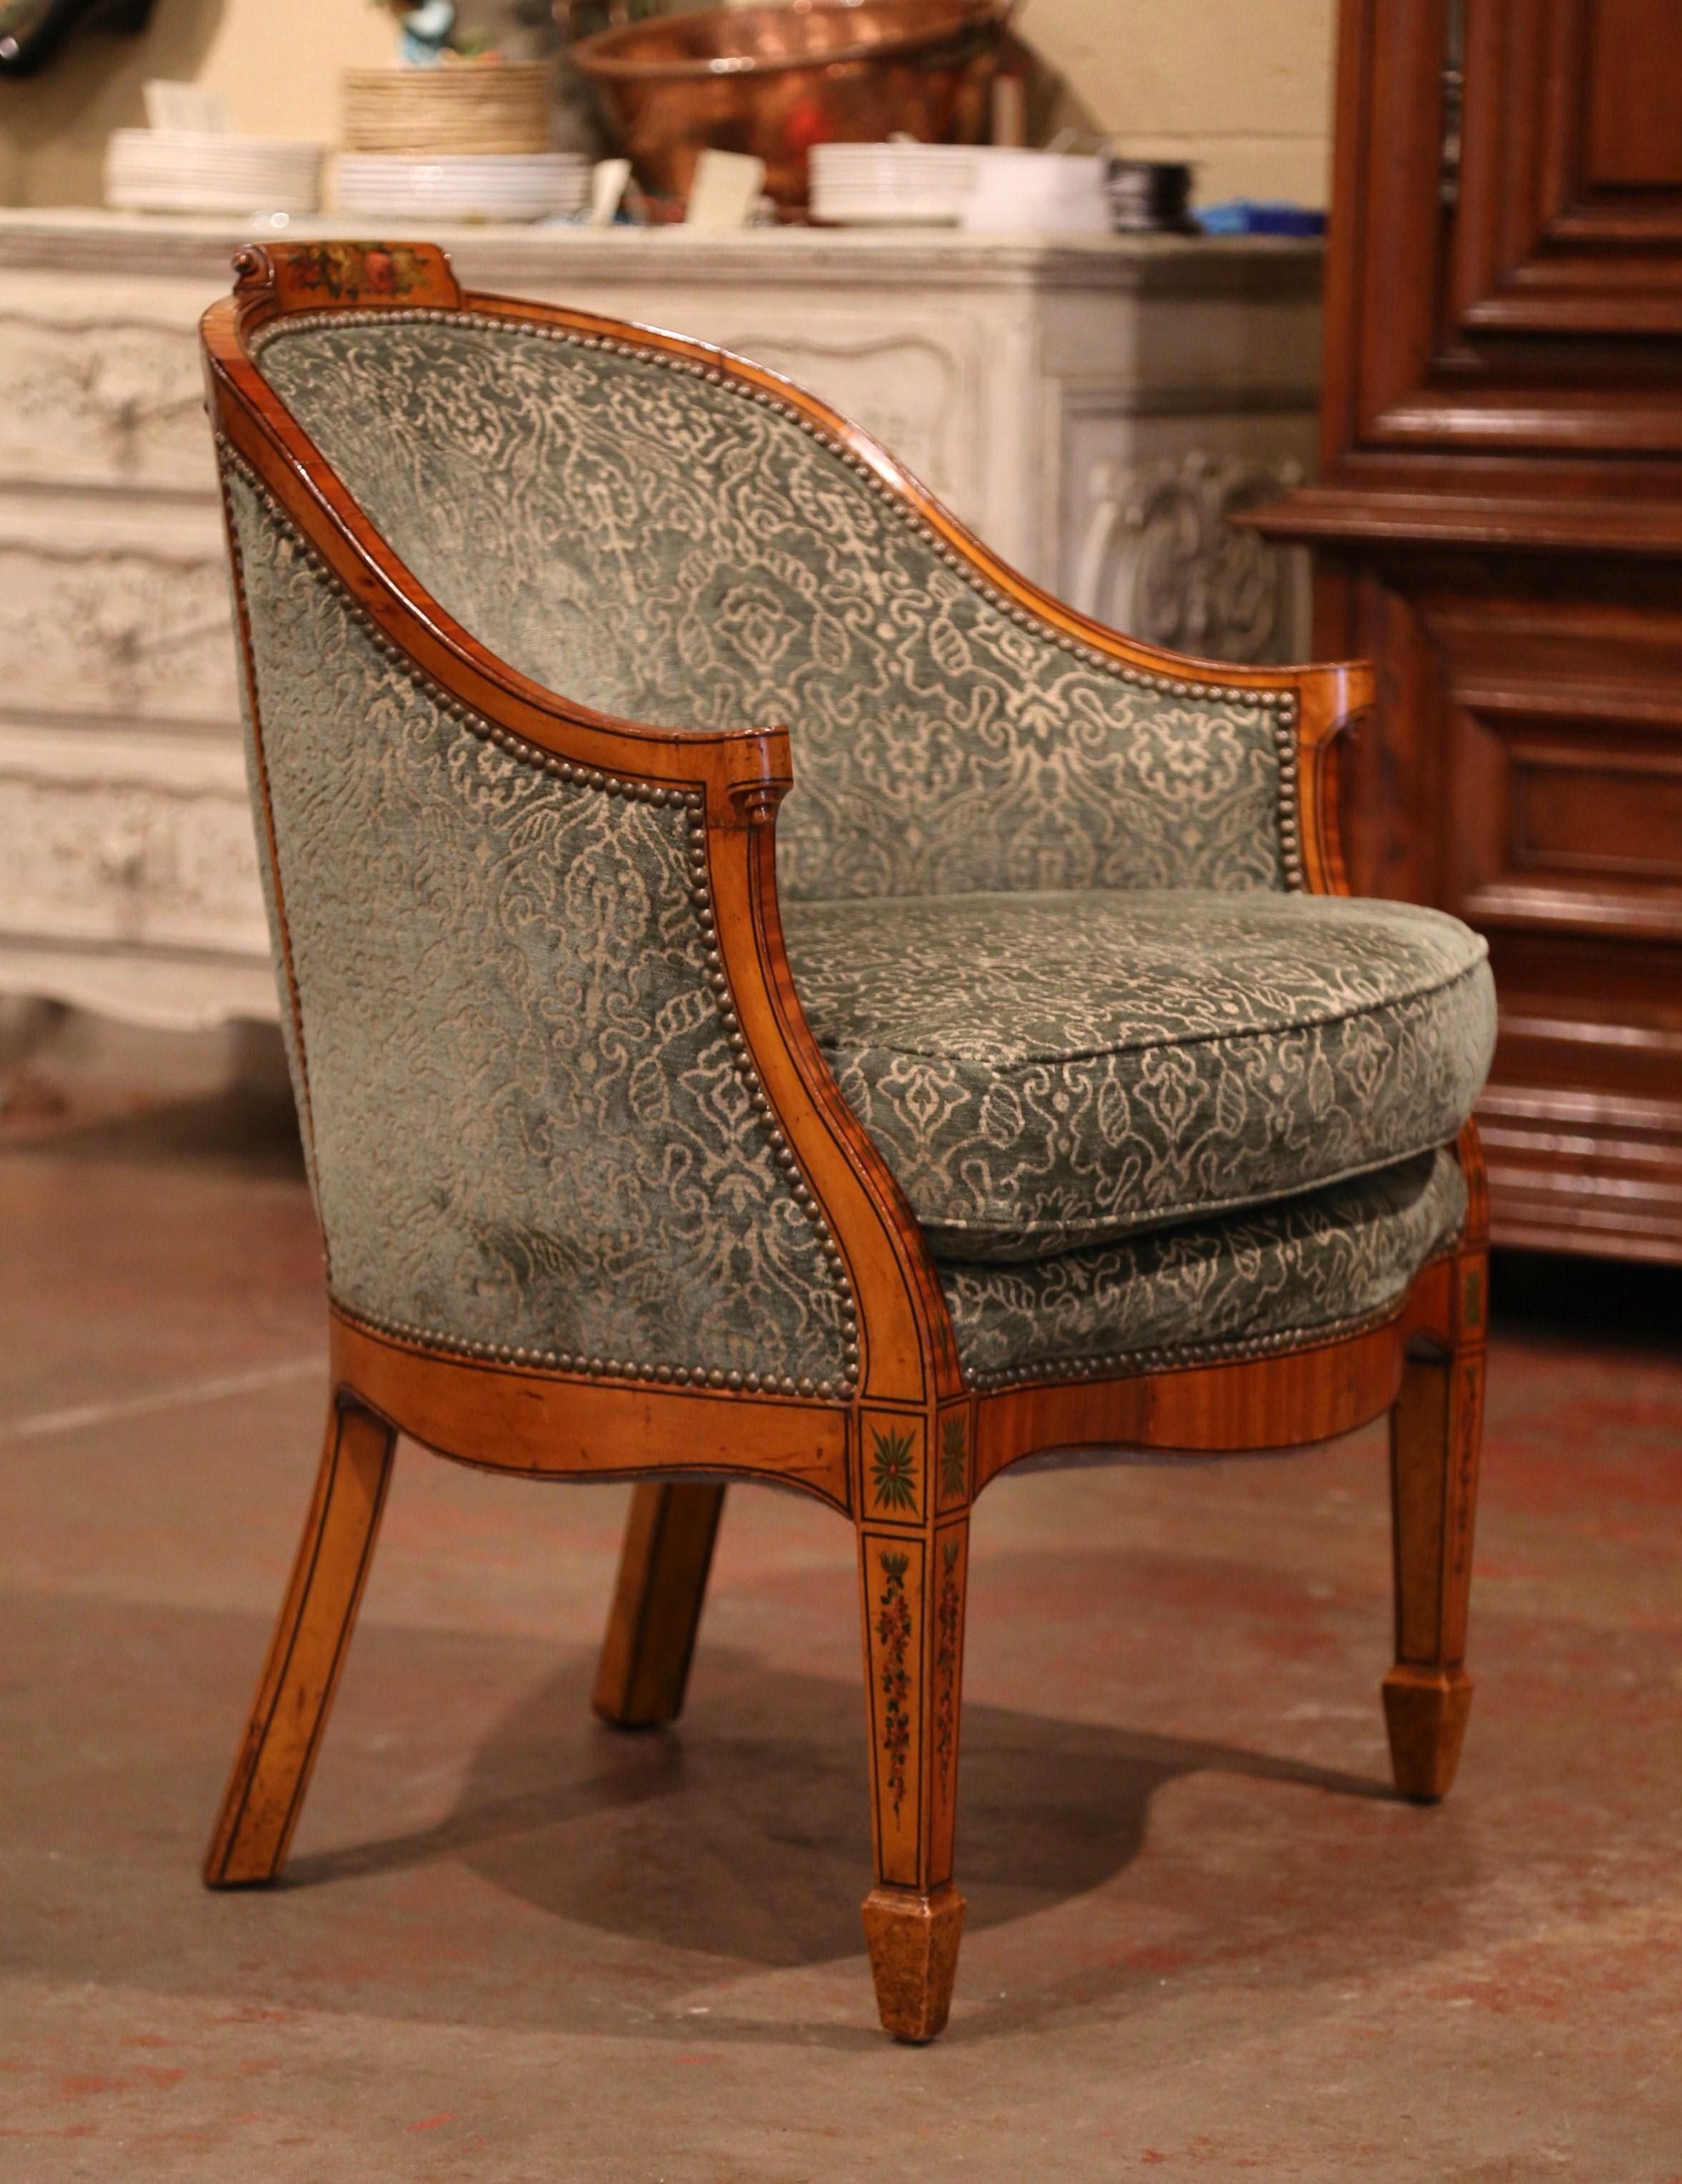 Decorate an office or a study with this elegant antique chair; crafted in France circa 1860, the desk chair features marquetry decor around the frame embellished with hand painted floral motifs. The chair stands on tapered front legs over a bombe